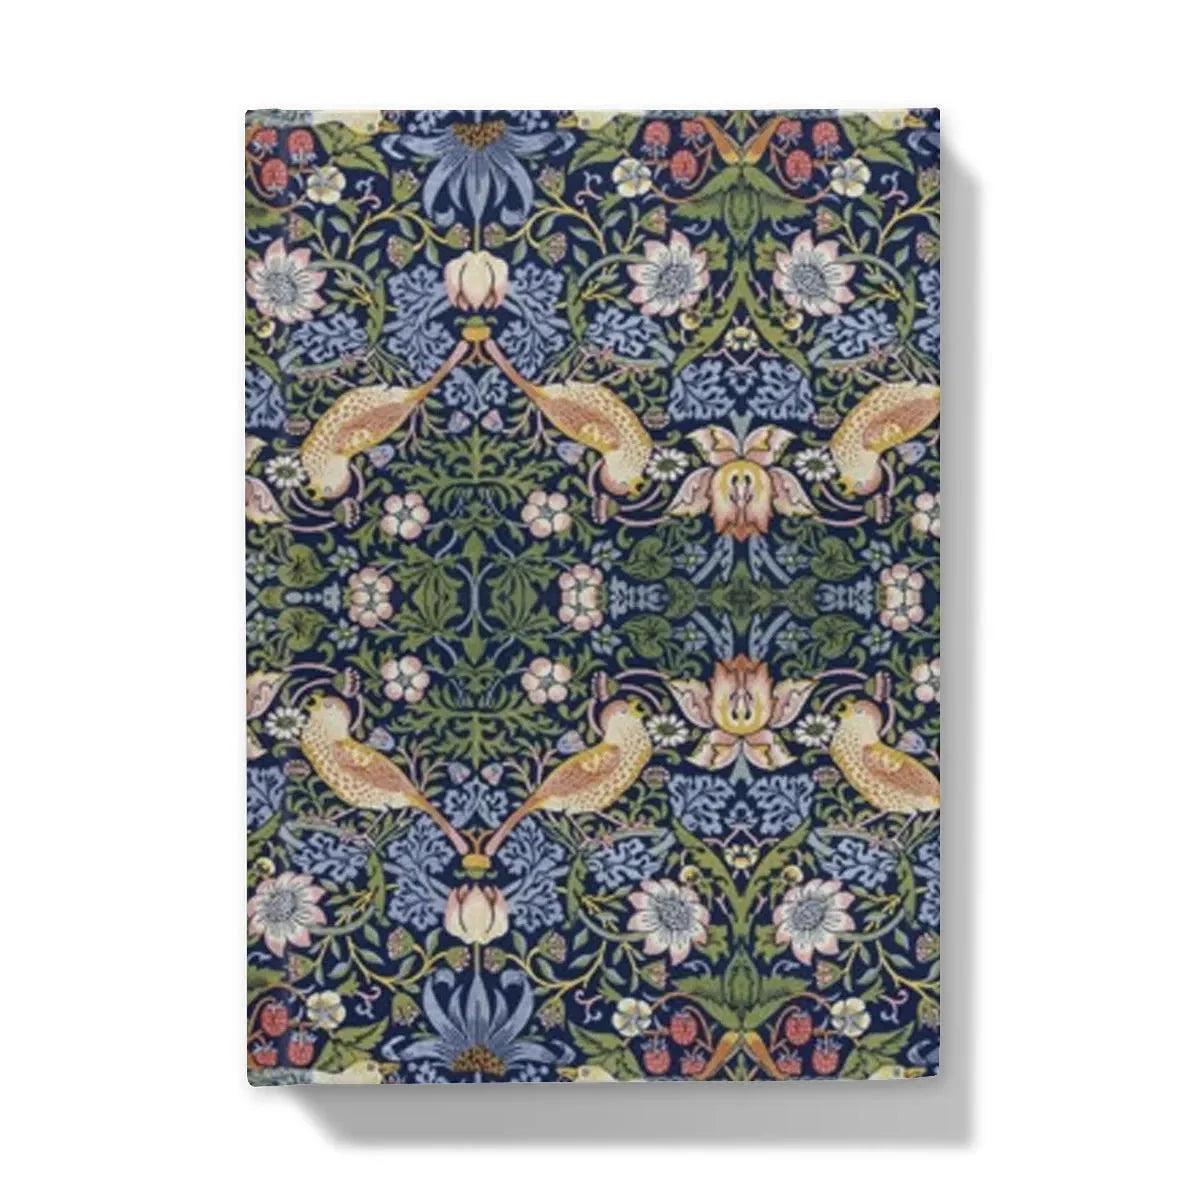 Strawberry Thief By William Morris Hardback Journal - 5’x7’ / 5’ x 7’ - Lined Paper - Notebooks & Notepads